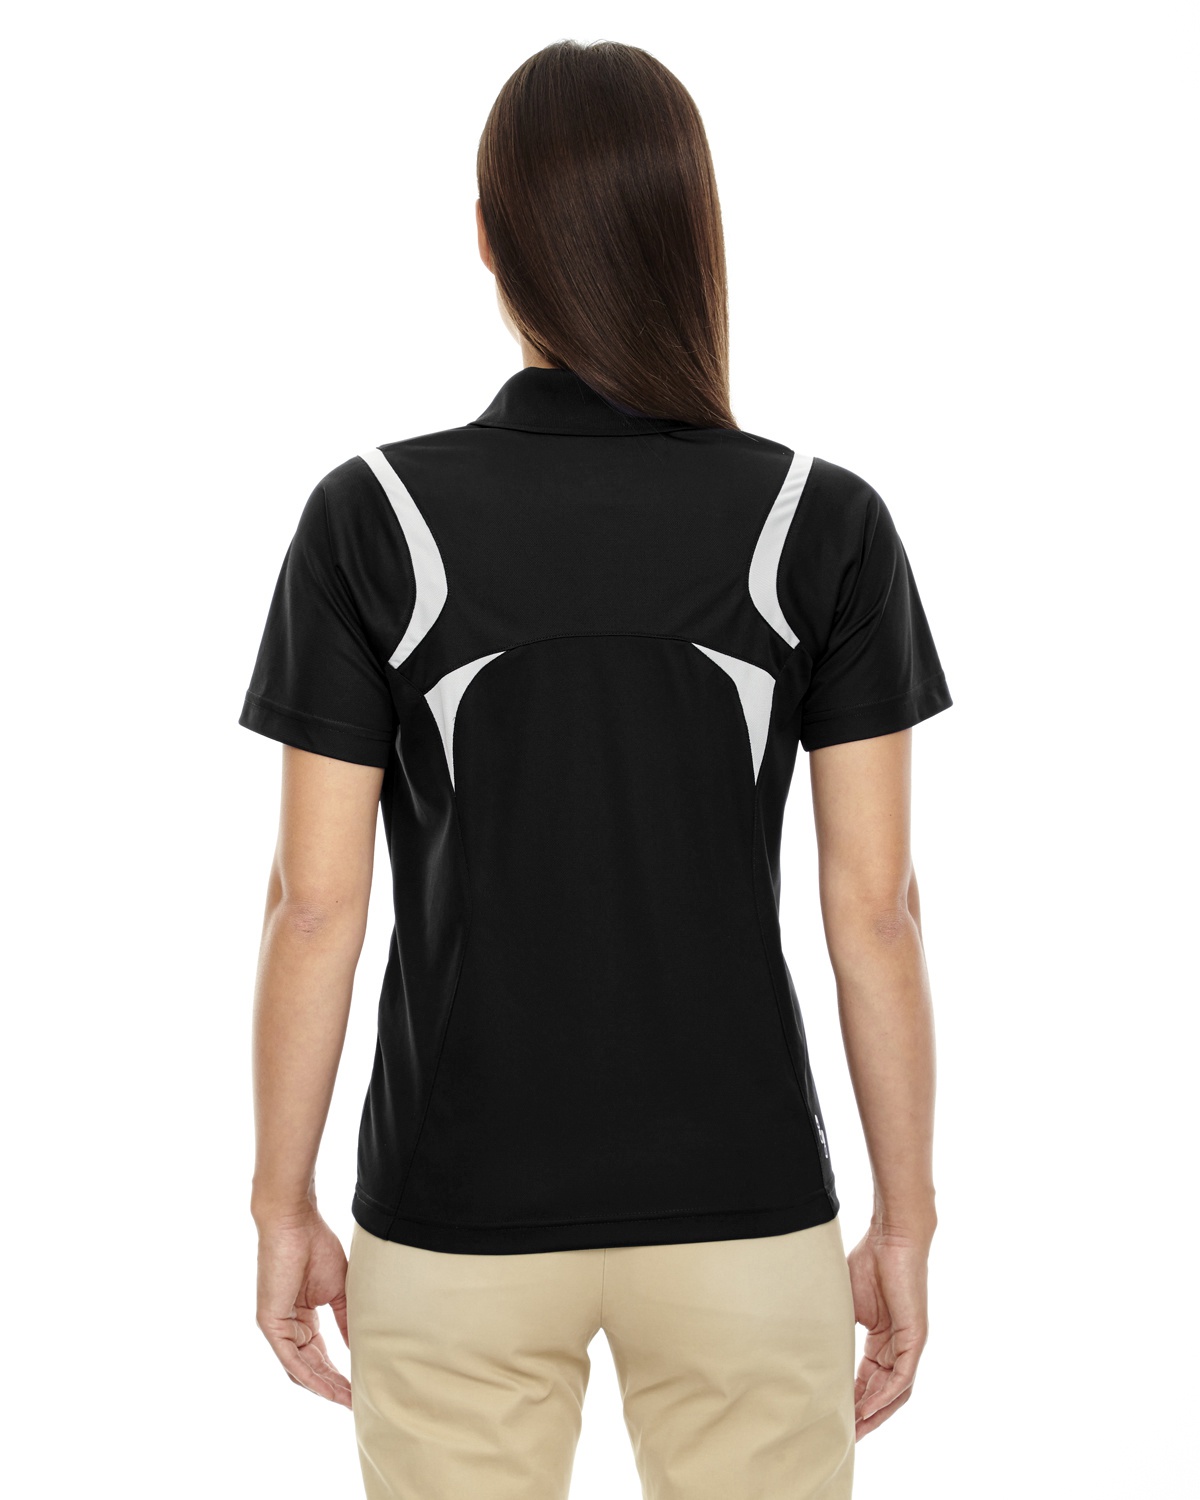 'Ash City - Extreme 75109 Ladies' Eperformance Venture Snag Protection Polo'